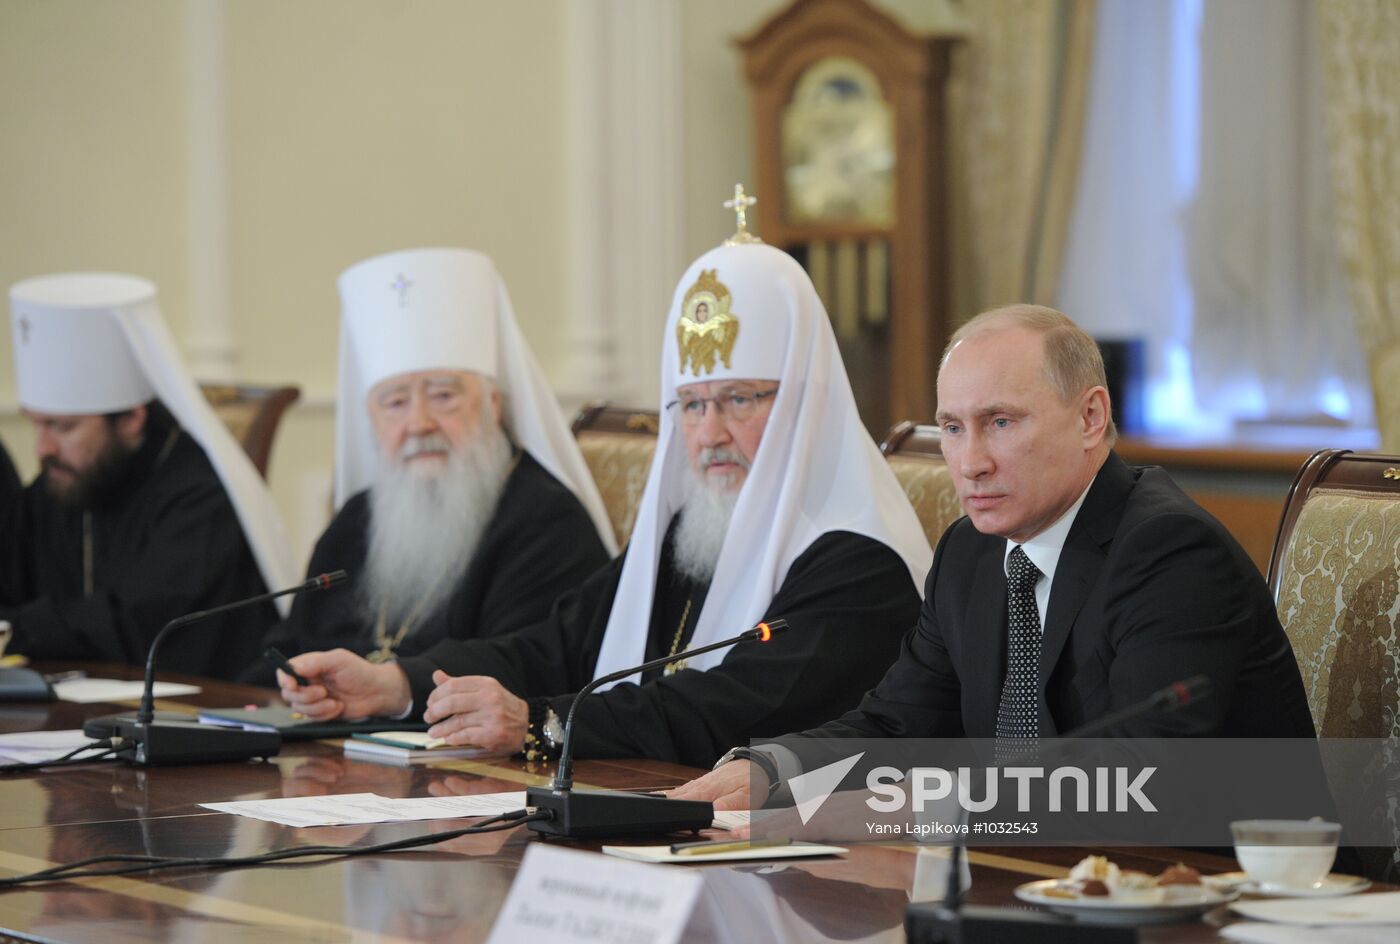 Putin meets with representatives of Russia's dominant religions